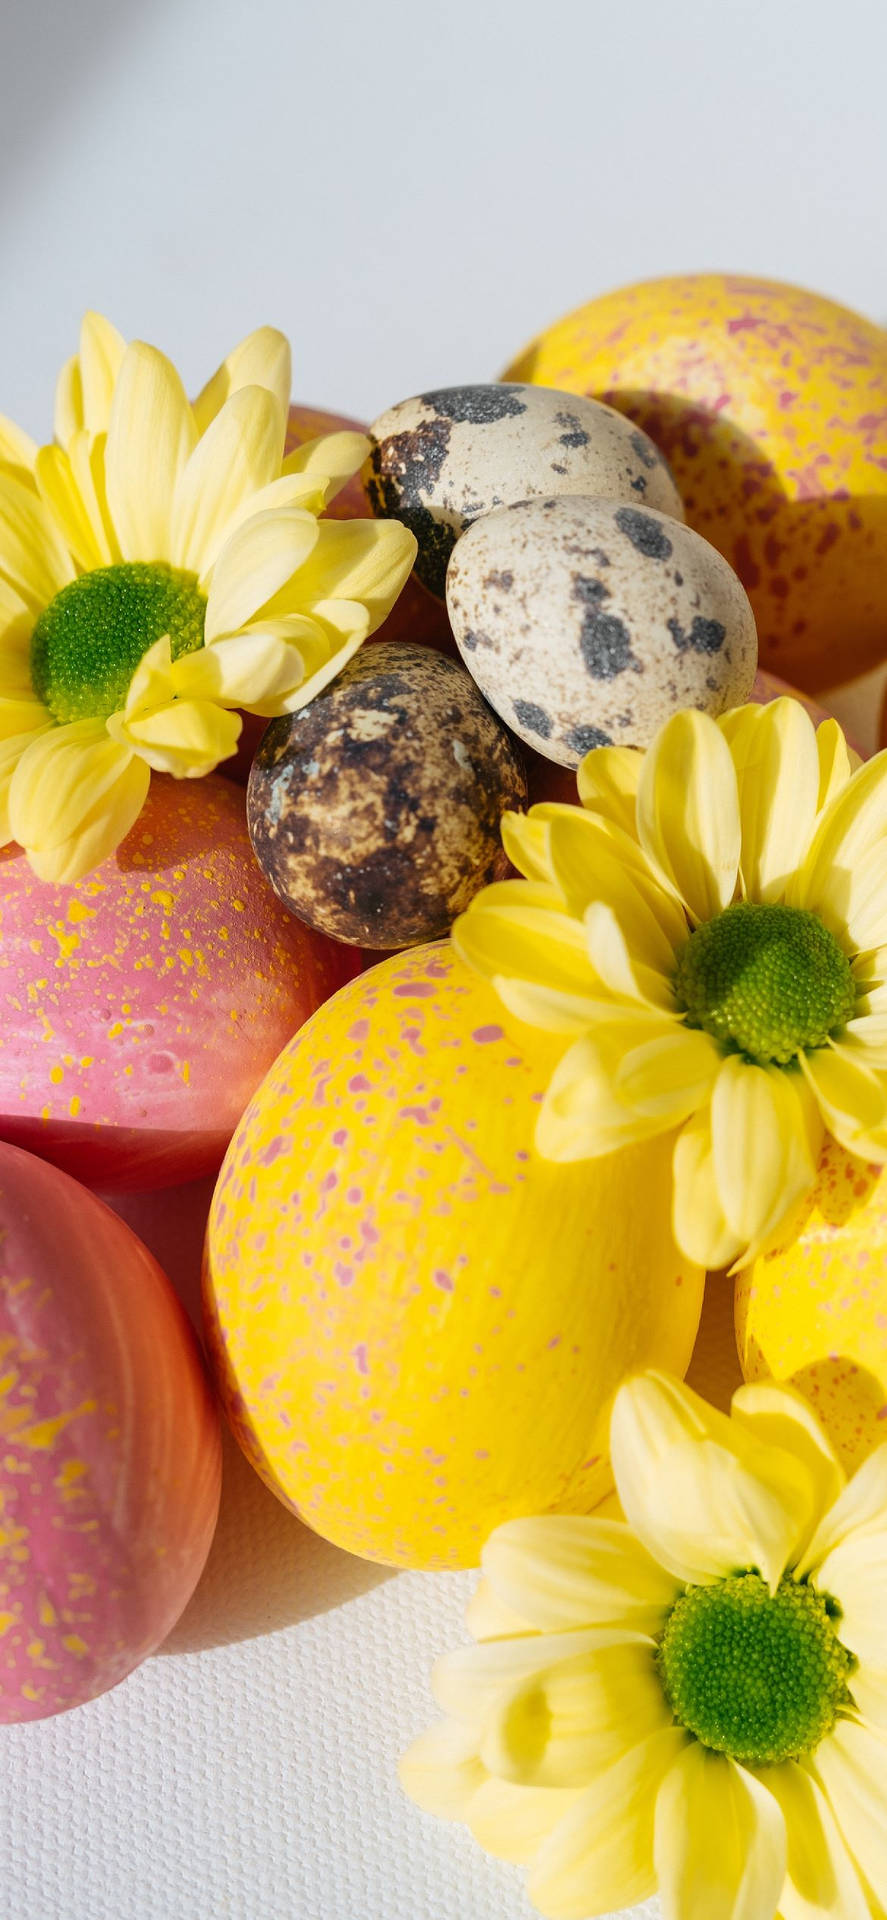 Celebrate Easter with your Phone Wallpaper